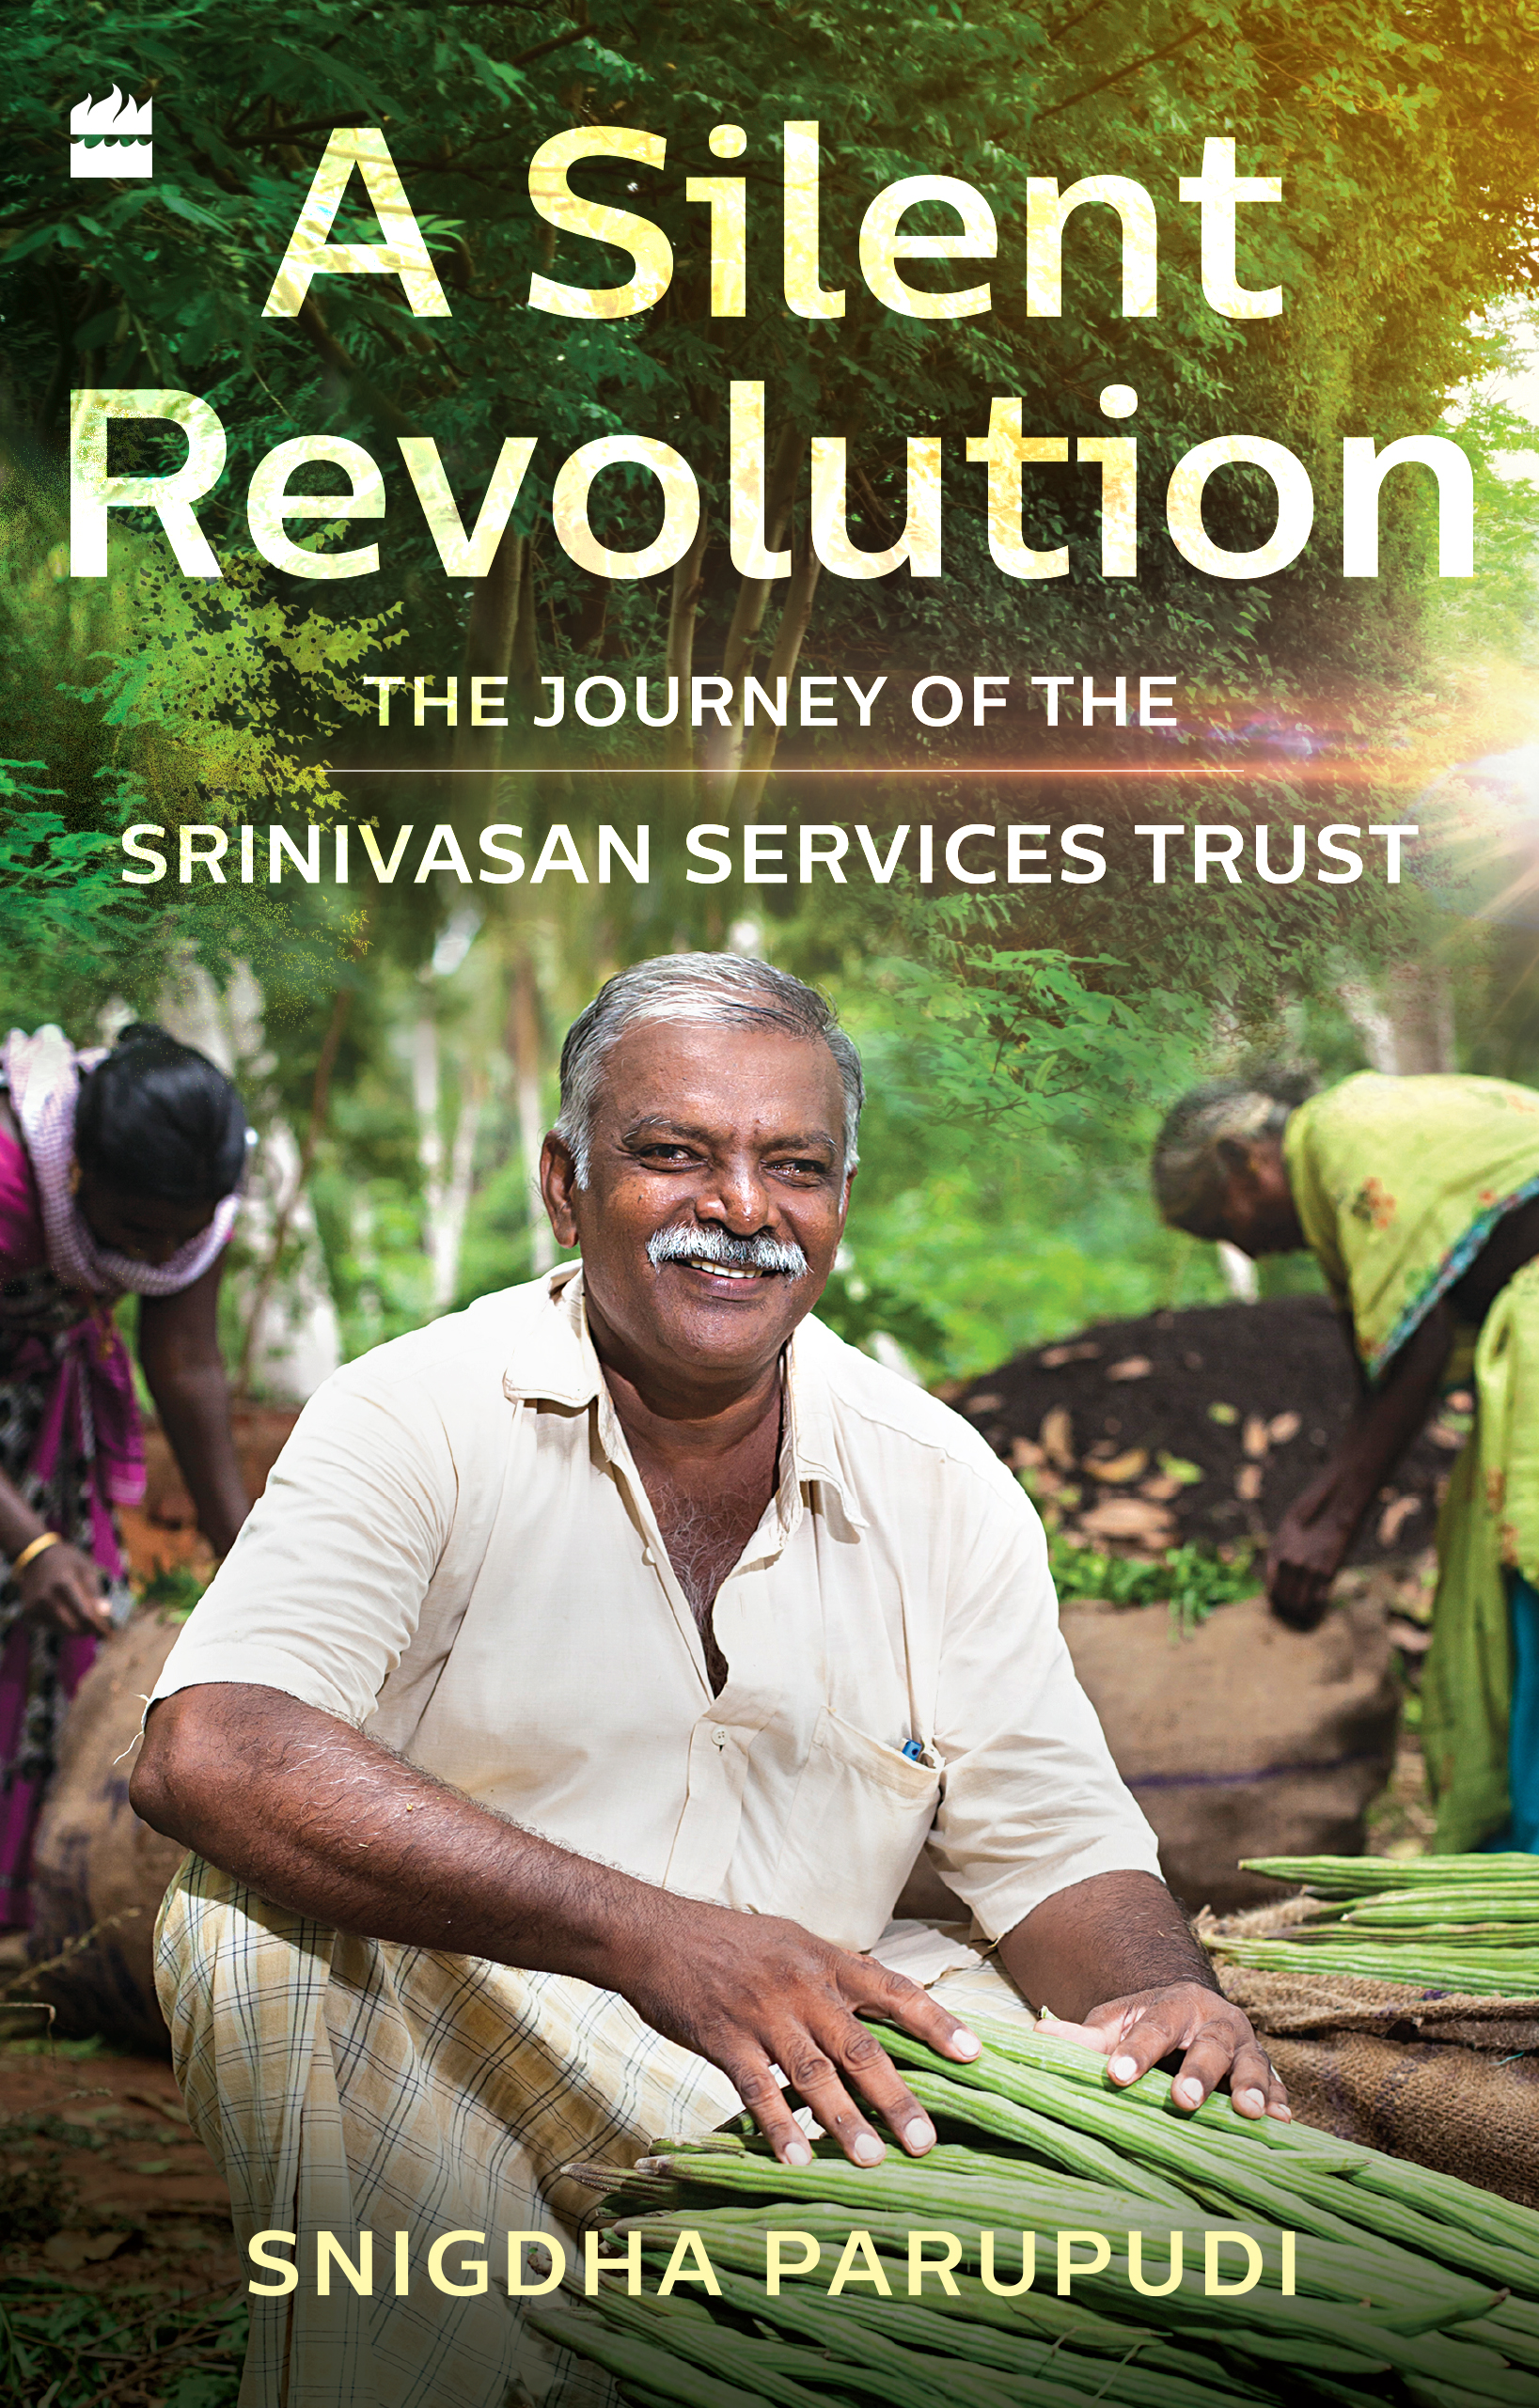 tvs-motor-company-releases-a-silent-revolution-a-book-to-mark-25-years-of-srinivasan-services-trusts-work-in-rural-development